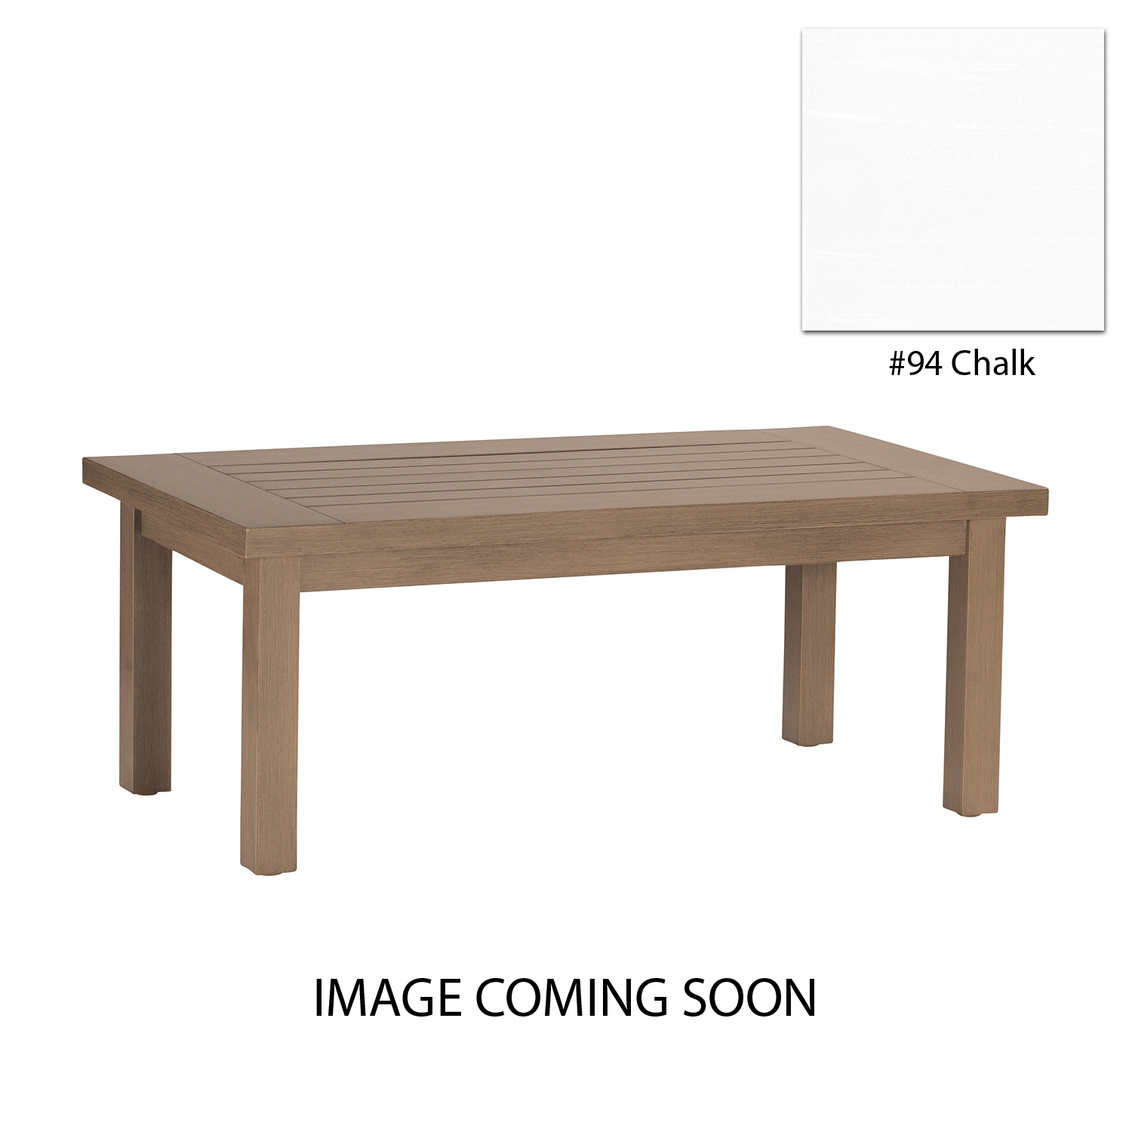 club aluminum rectangular coffee table in chalk product image